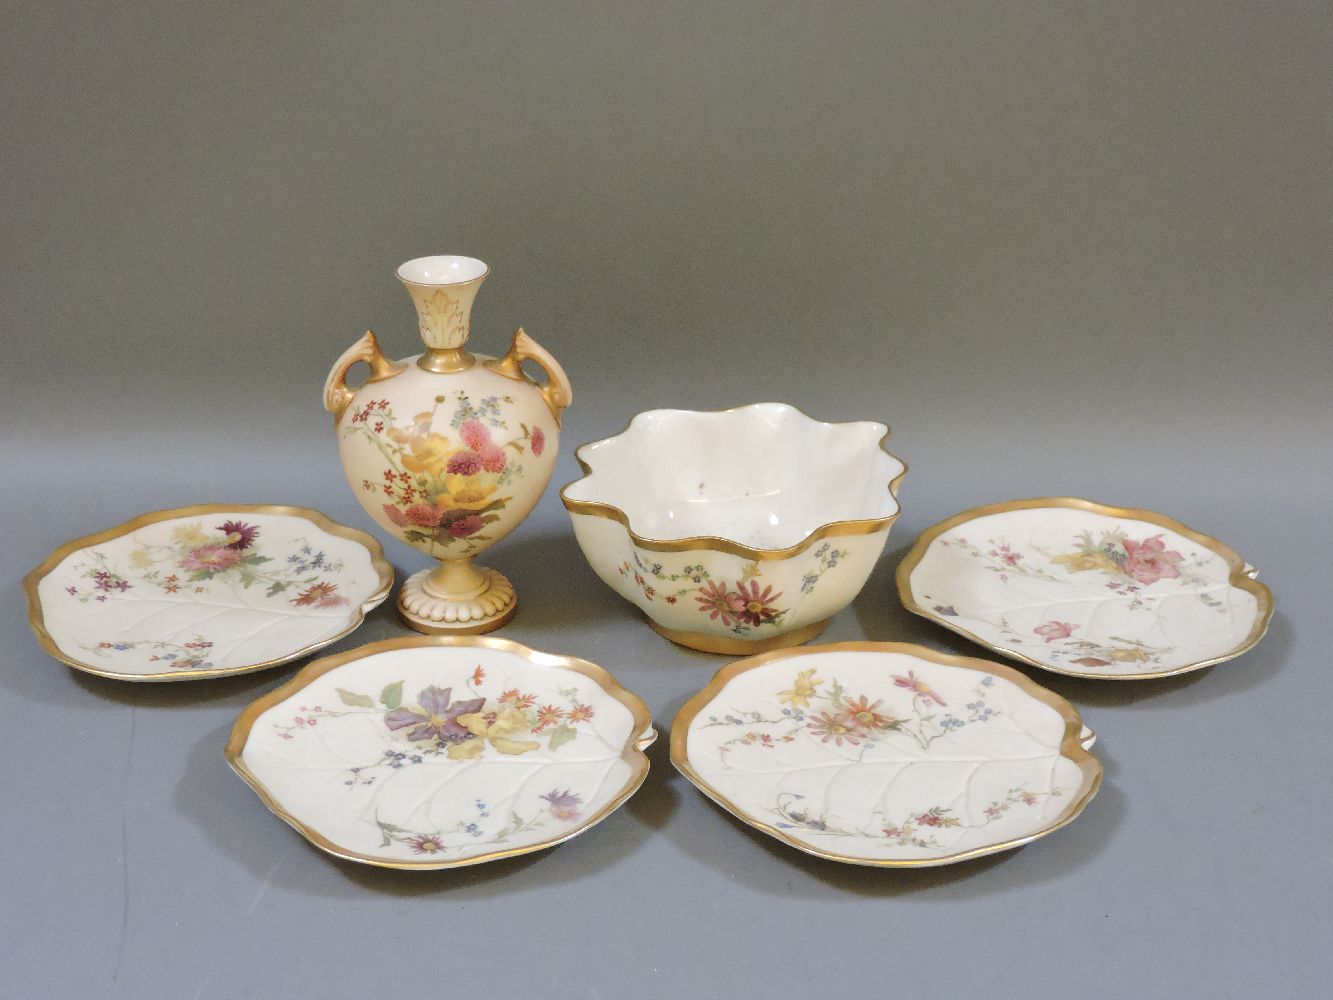 Two Royal Worcester twin handled vases, with painted floral pattern on blush ivory ground, shape